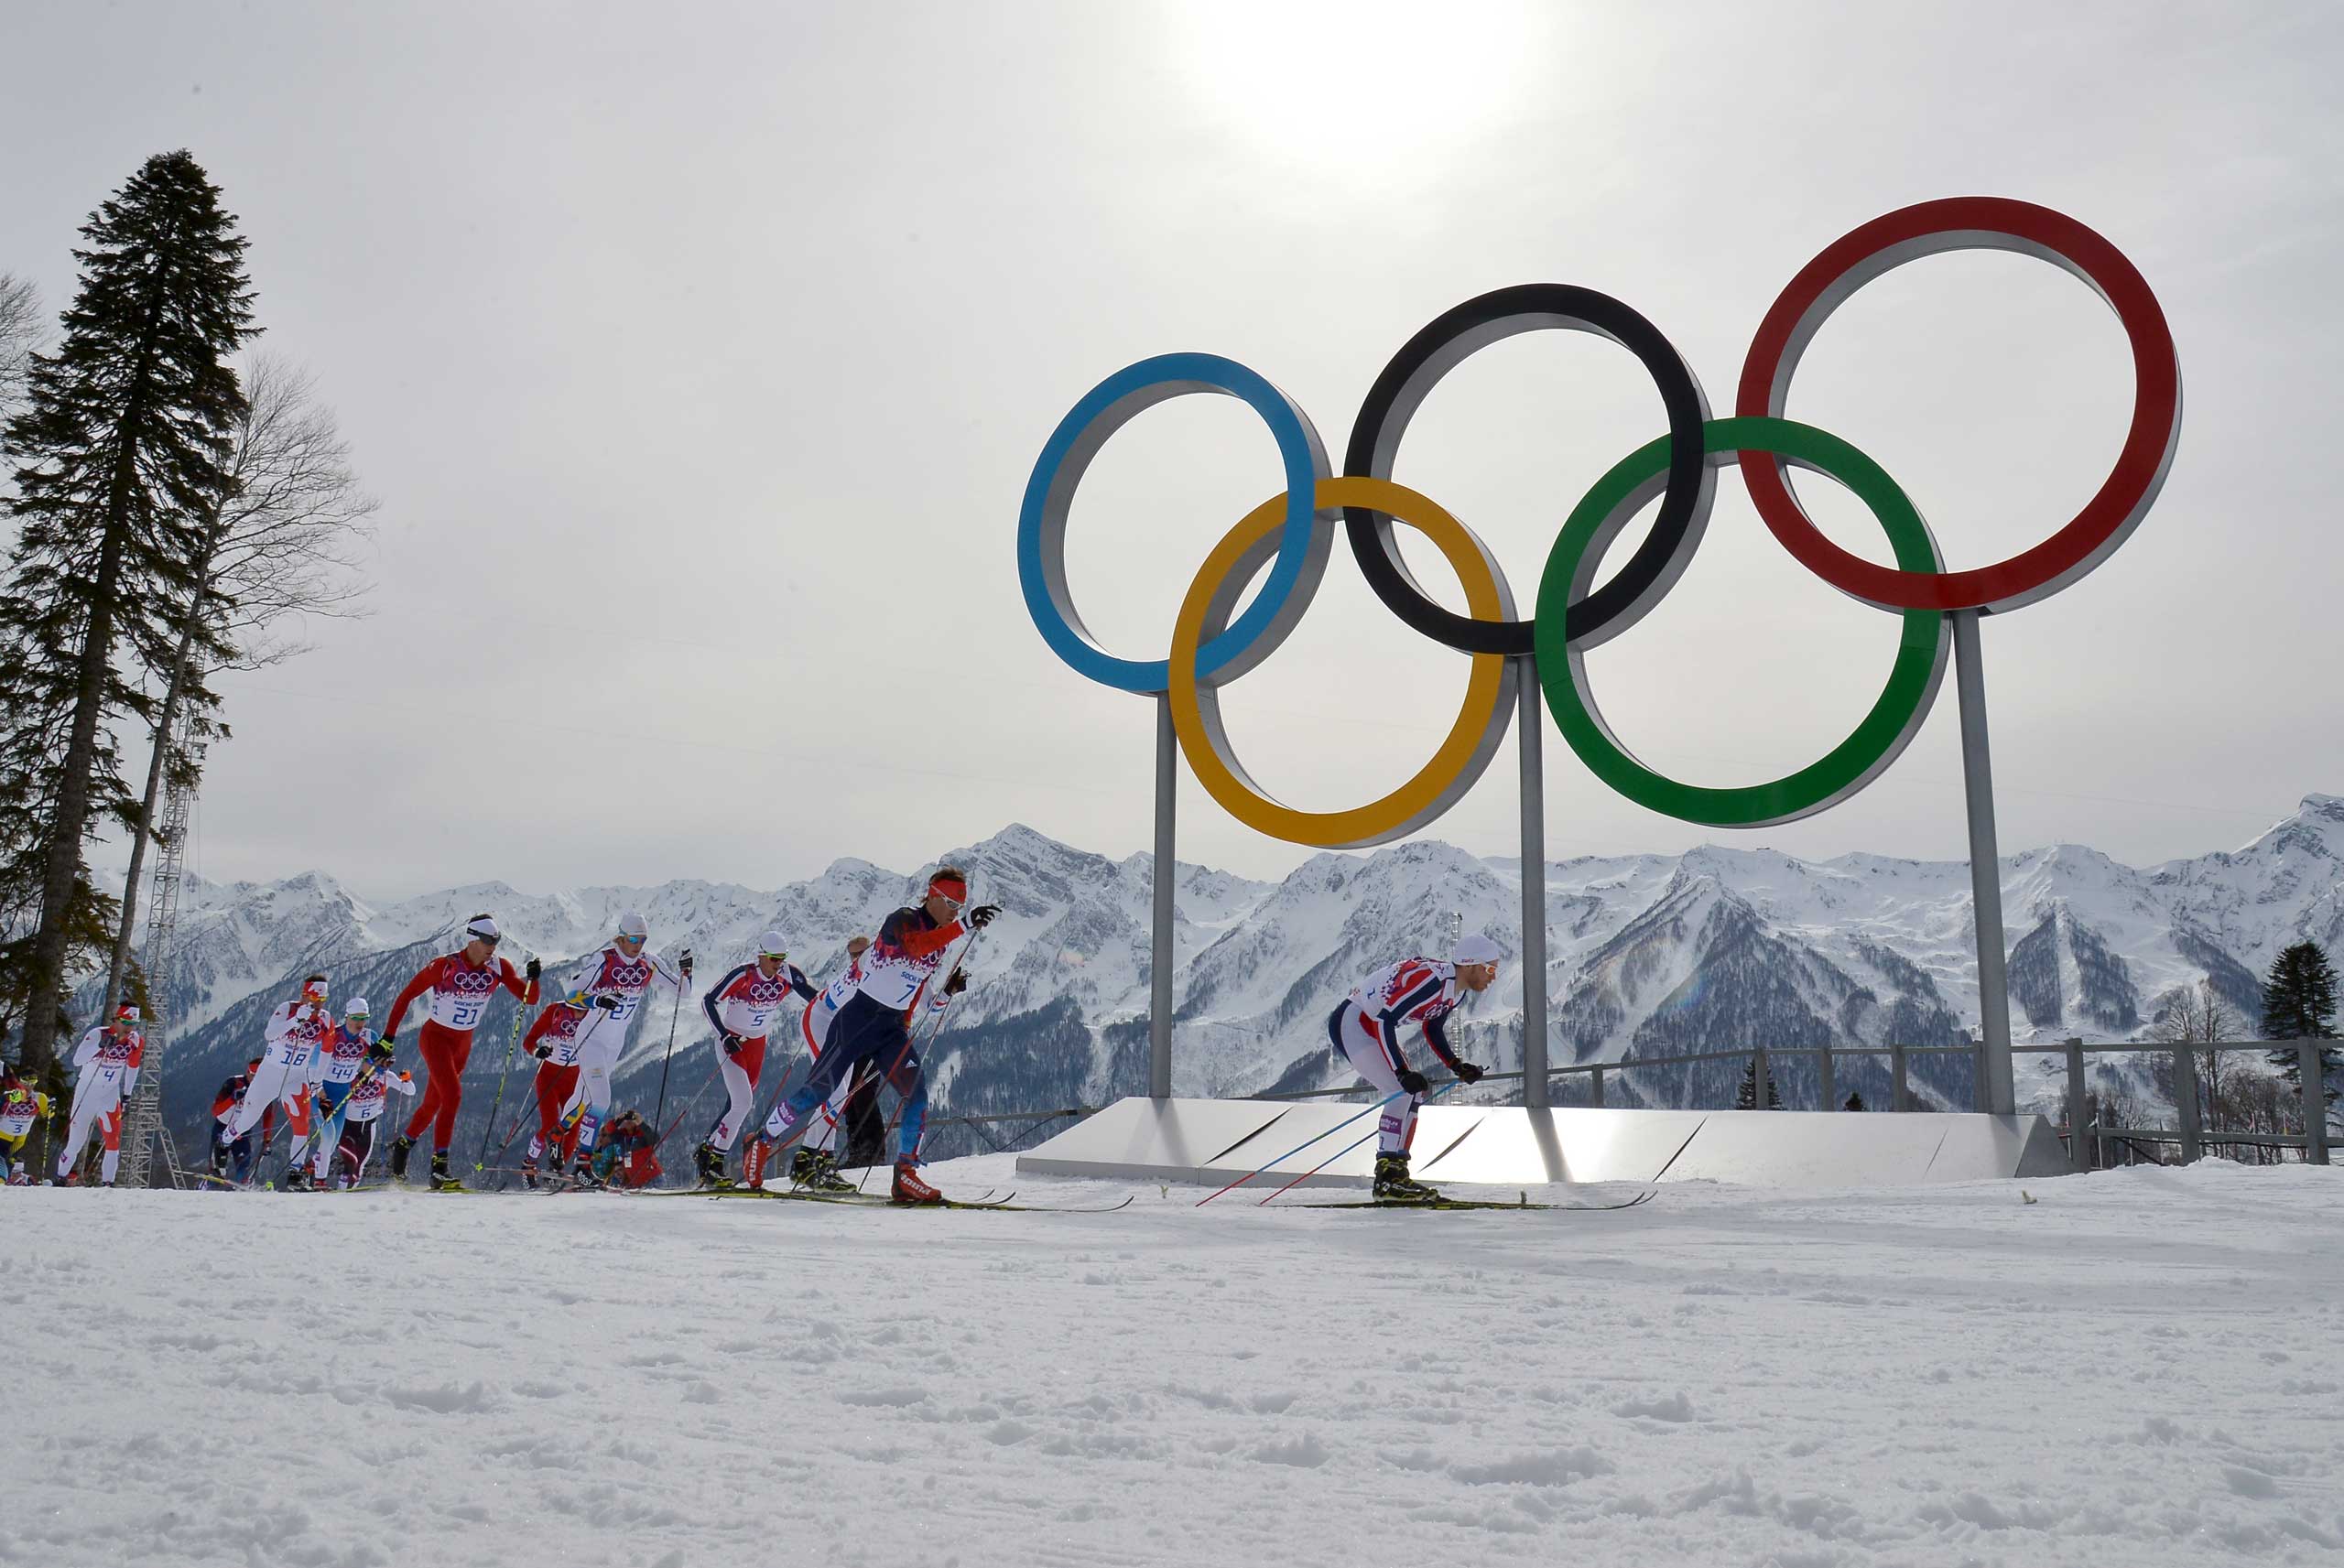 Skiers compete past the Olympic Rings in the Men's Cross-Country Skiing 15km + 15km Skiathlon at the Laura Cross-Country Ski and Biathlon Center during the Sochi Winter Olympics in Russia on Feb. 9, 2014. (Alberto Pizzoli—AFP/Getty Images)